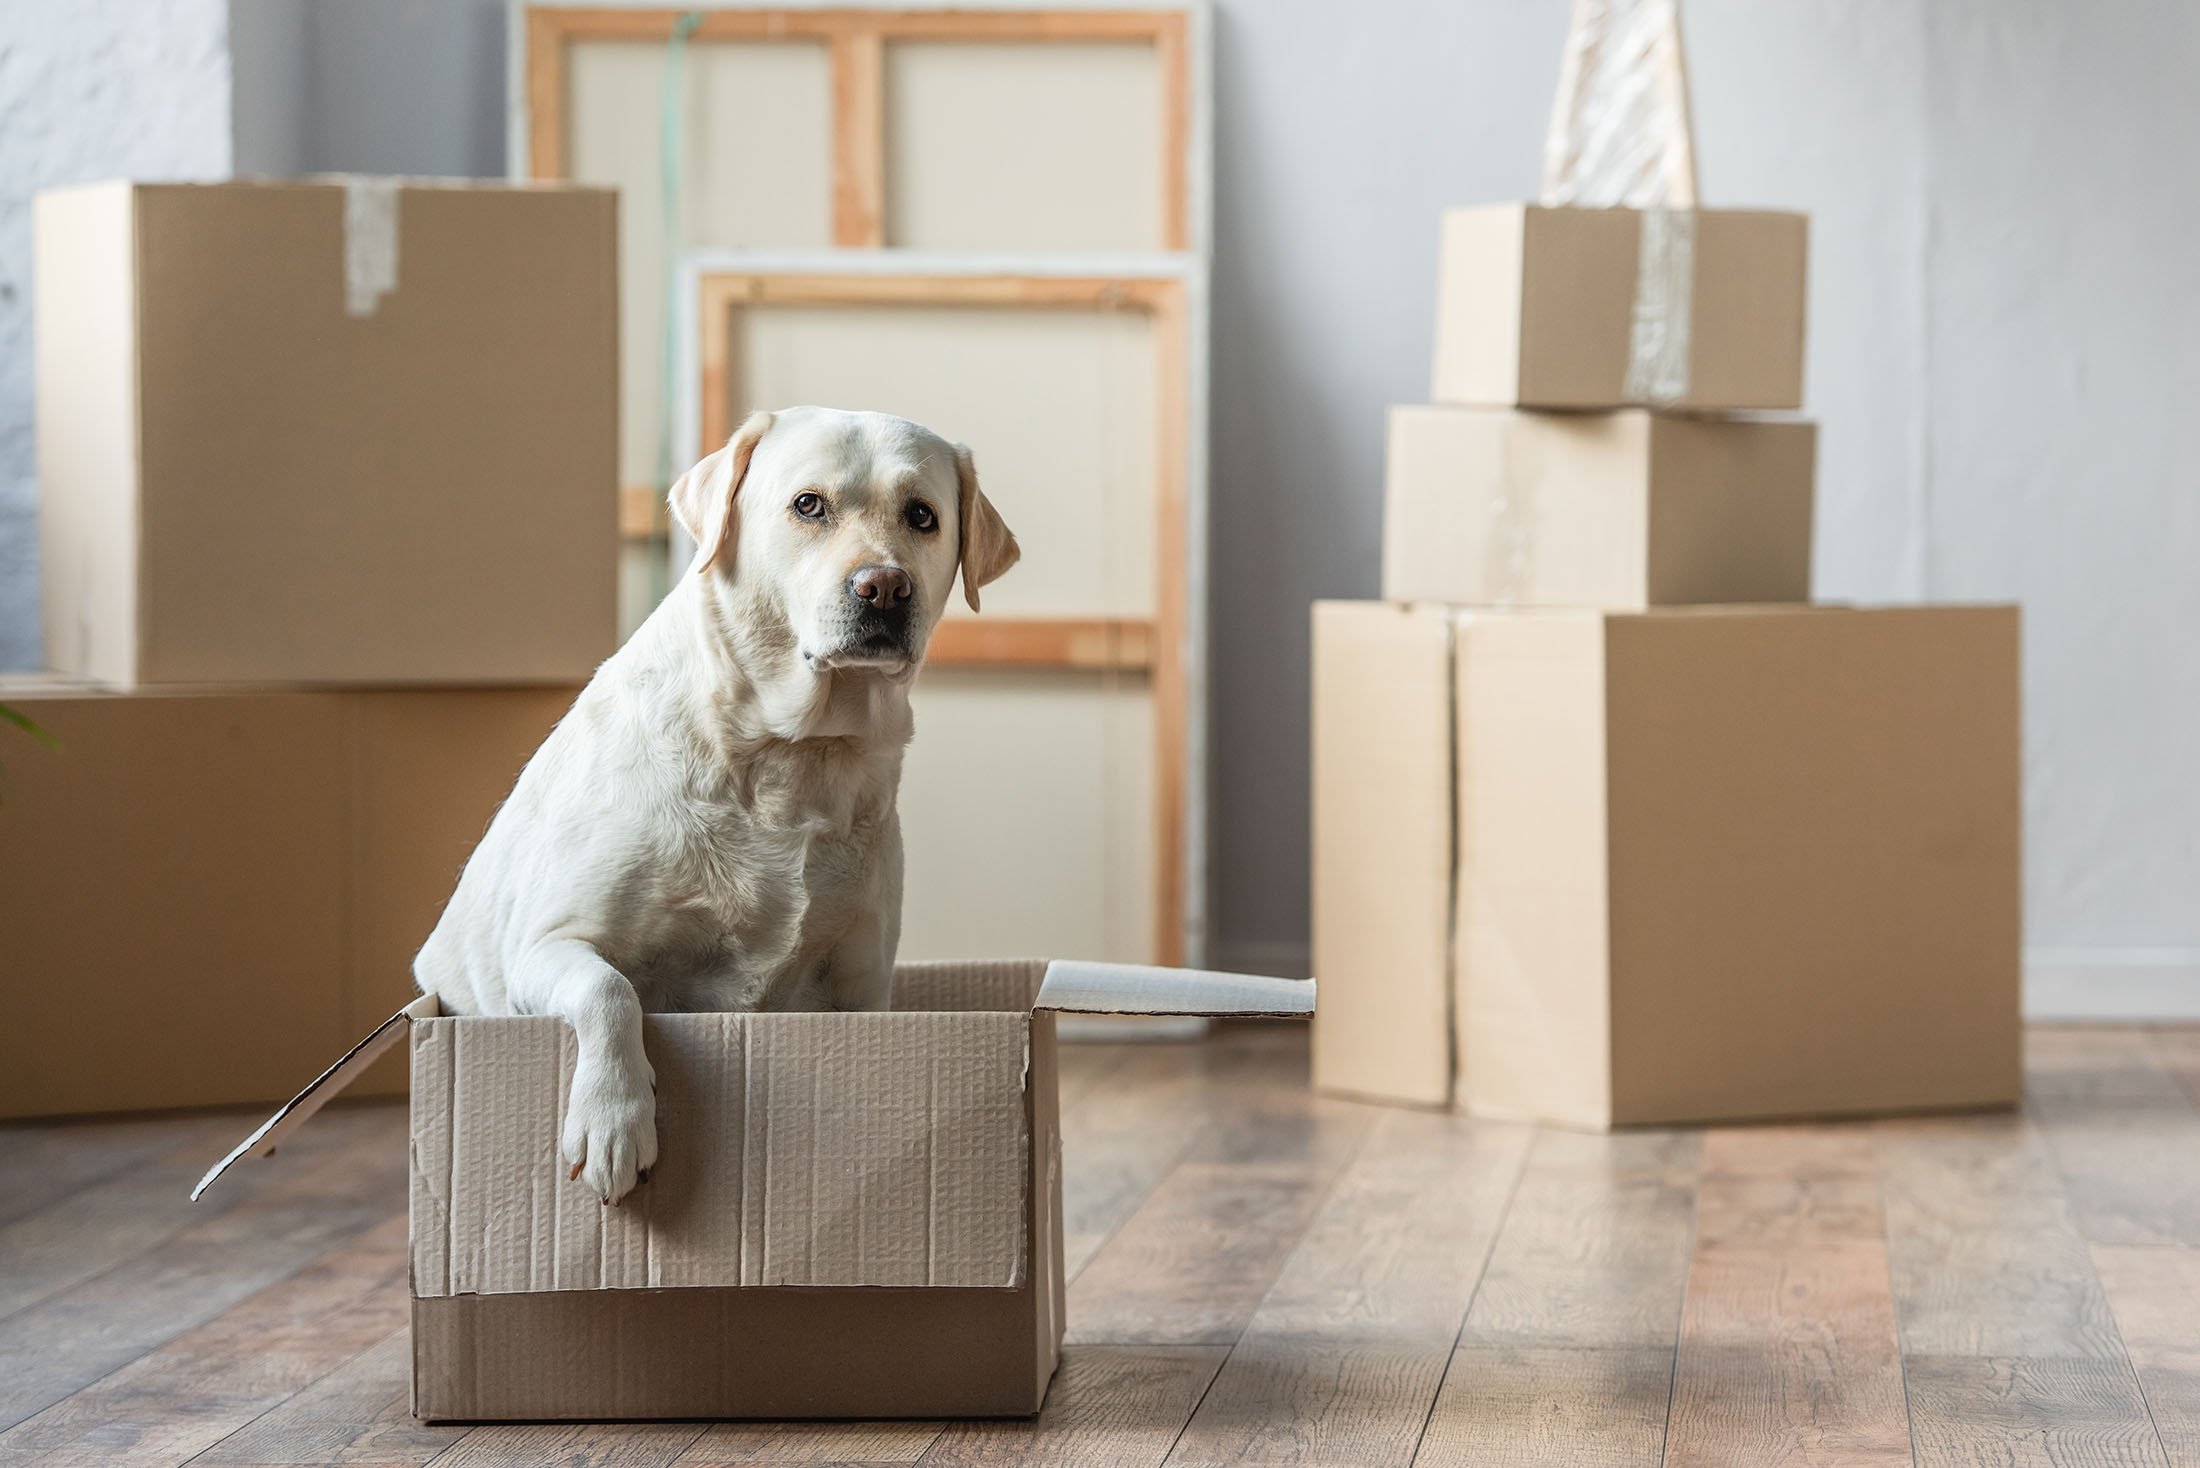 How do you find a new home for your dog?